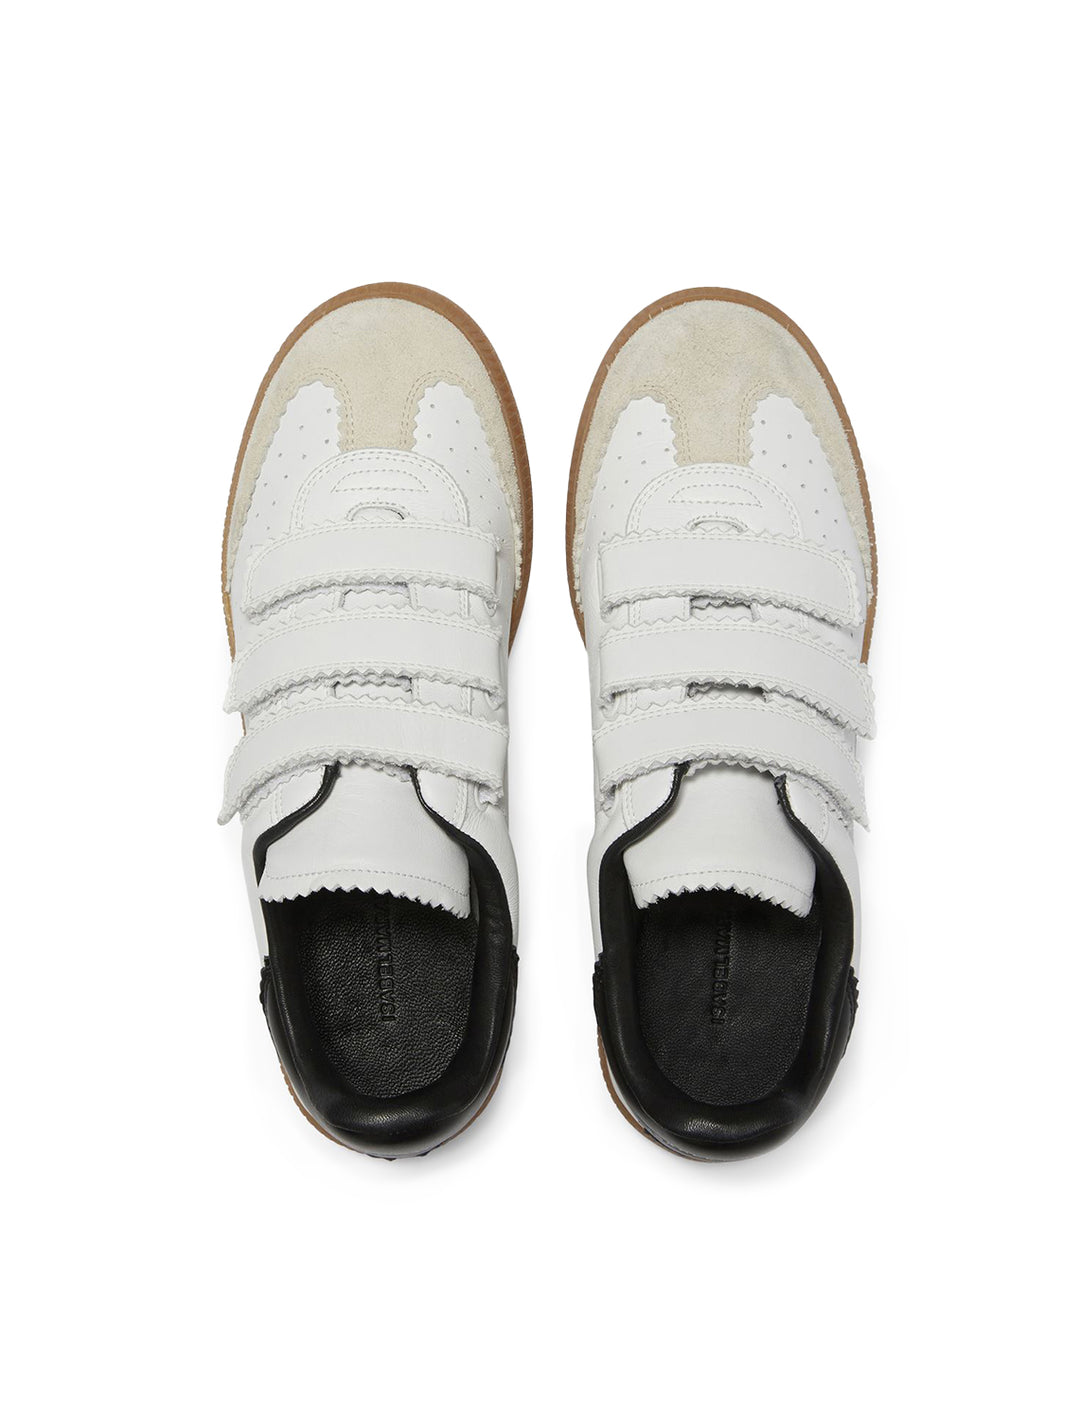 Overhead view of Isabel Marant Etoile's Beth Sneaker in White.